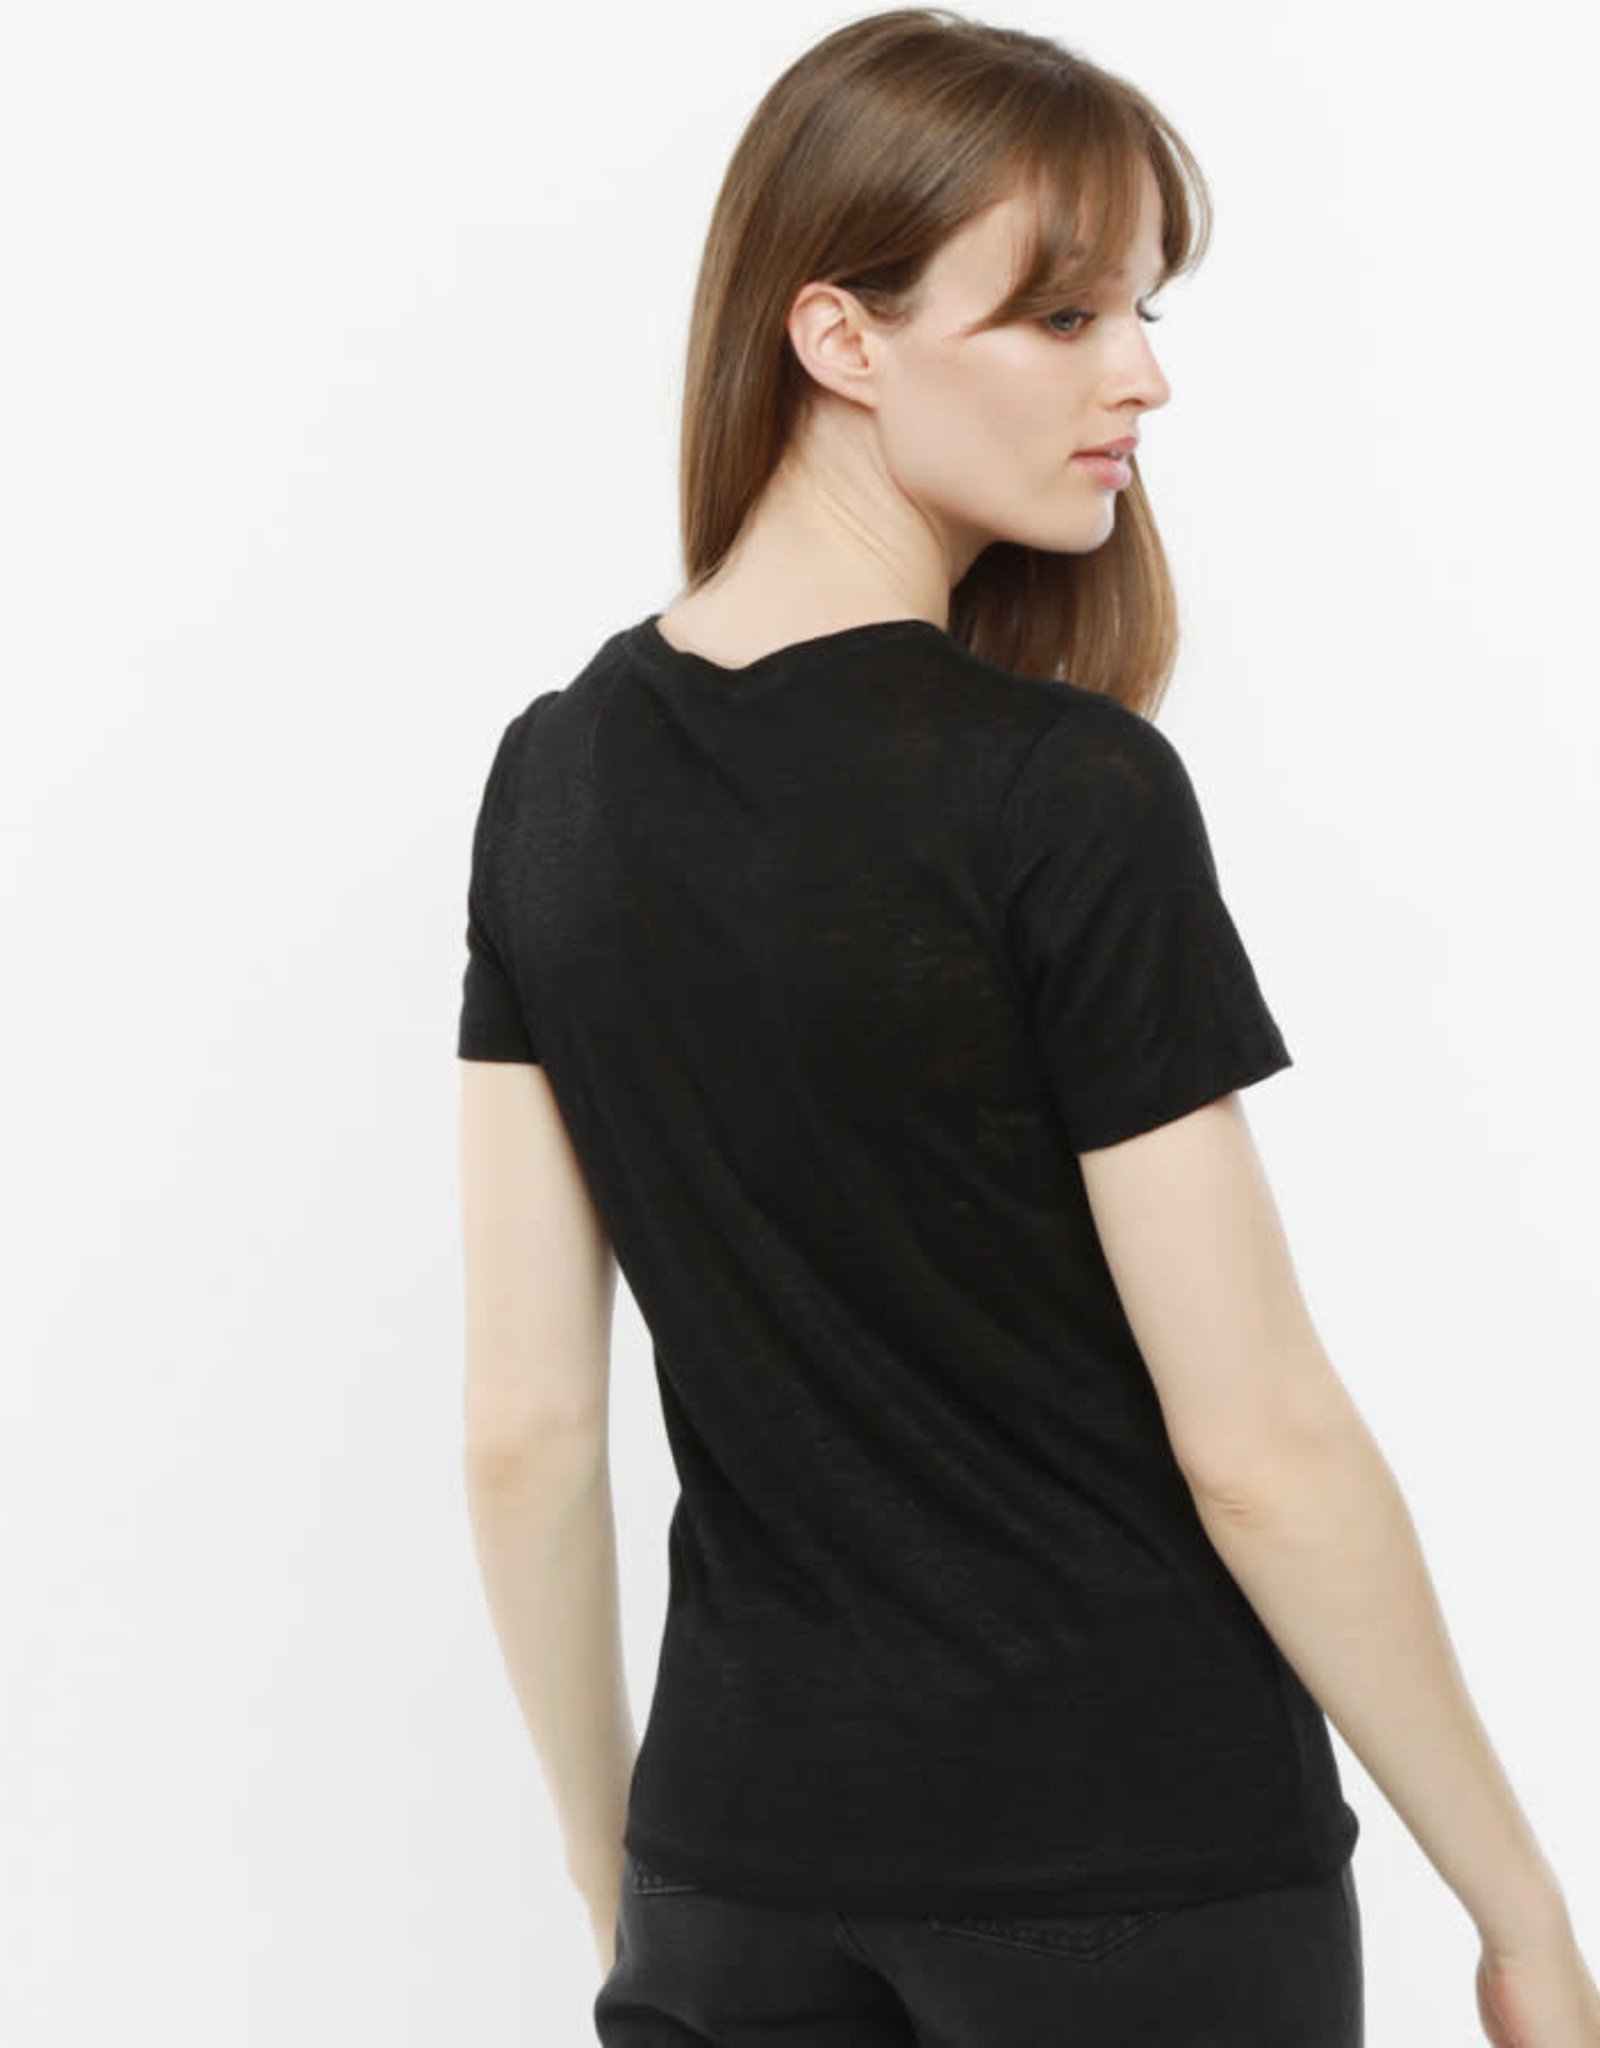 The Golden House T-Shirt 'Melody' - Black